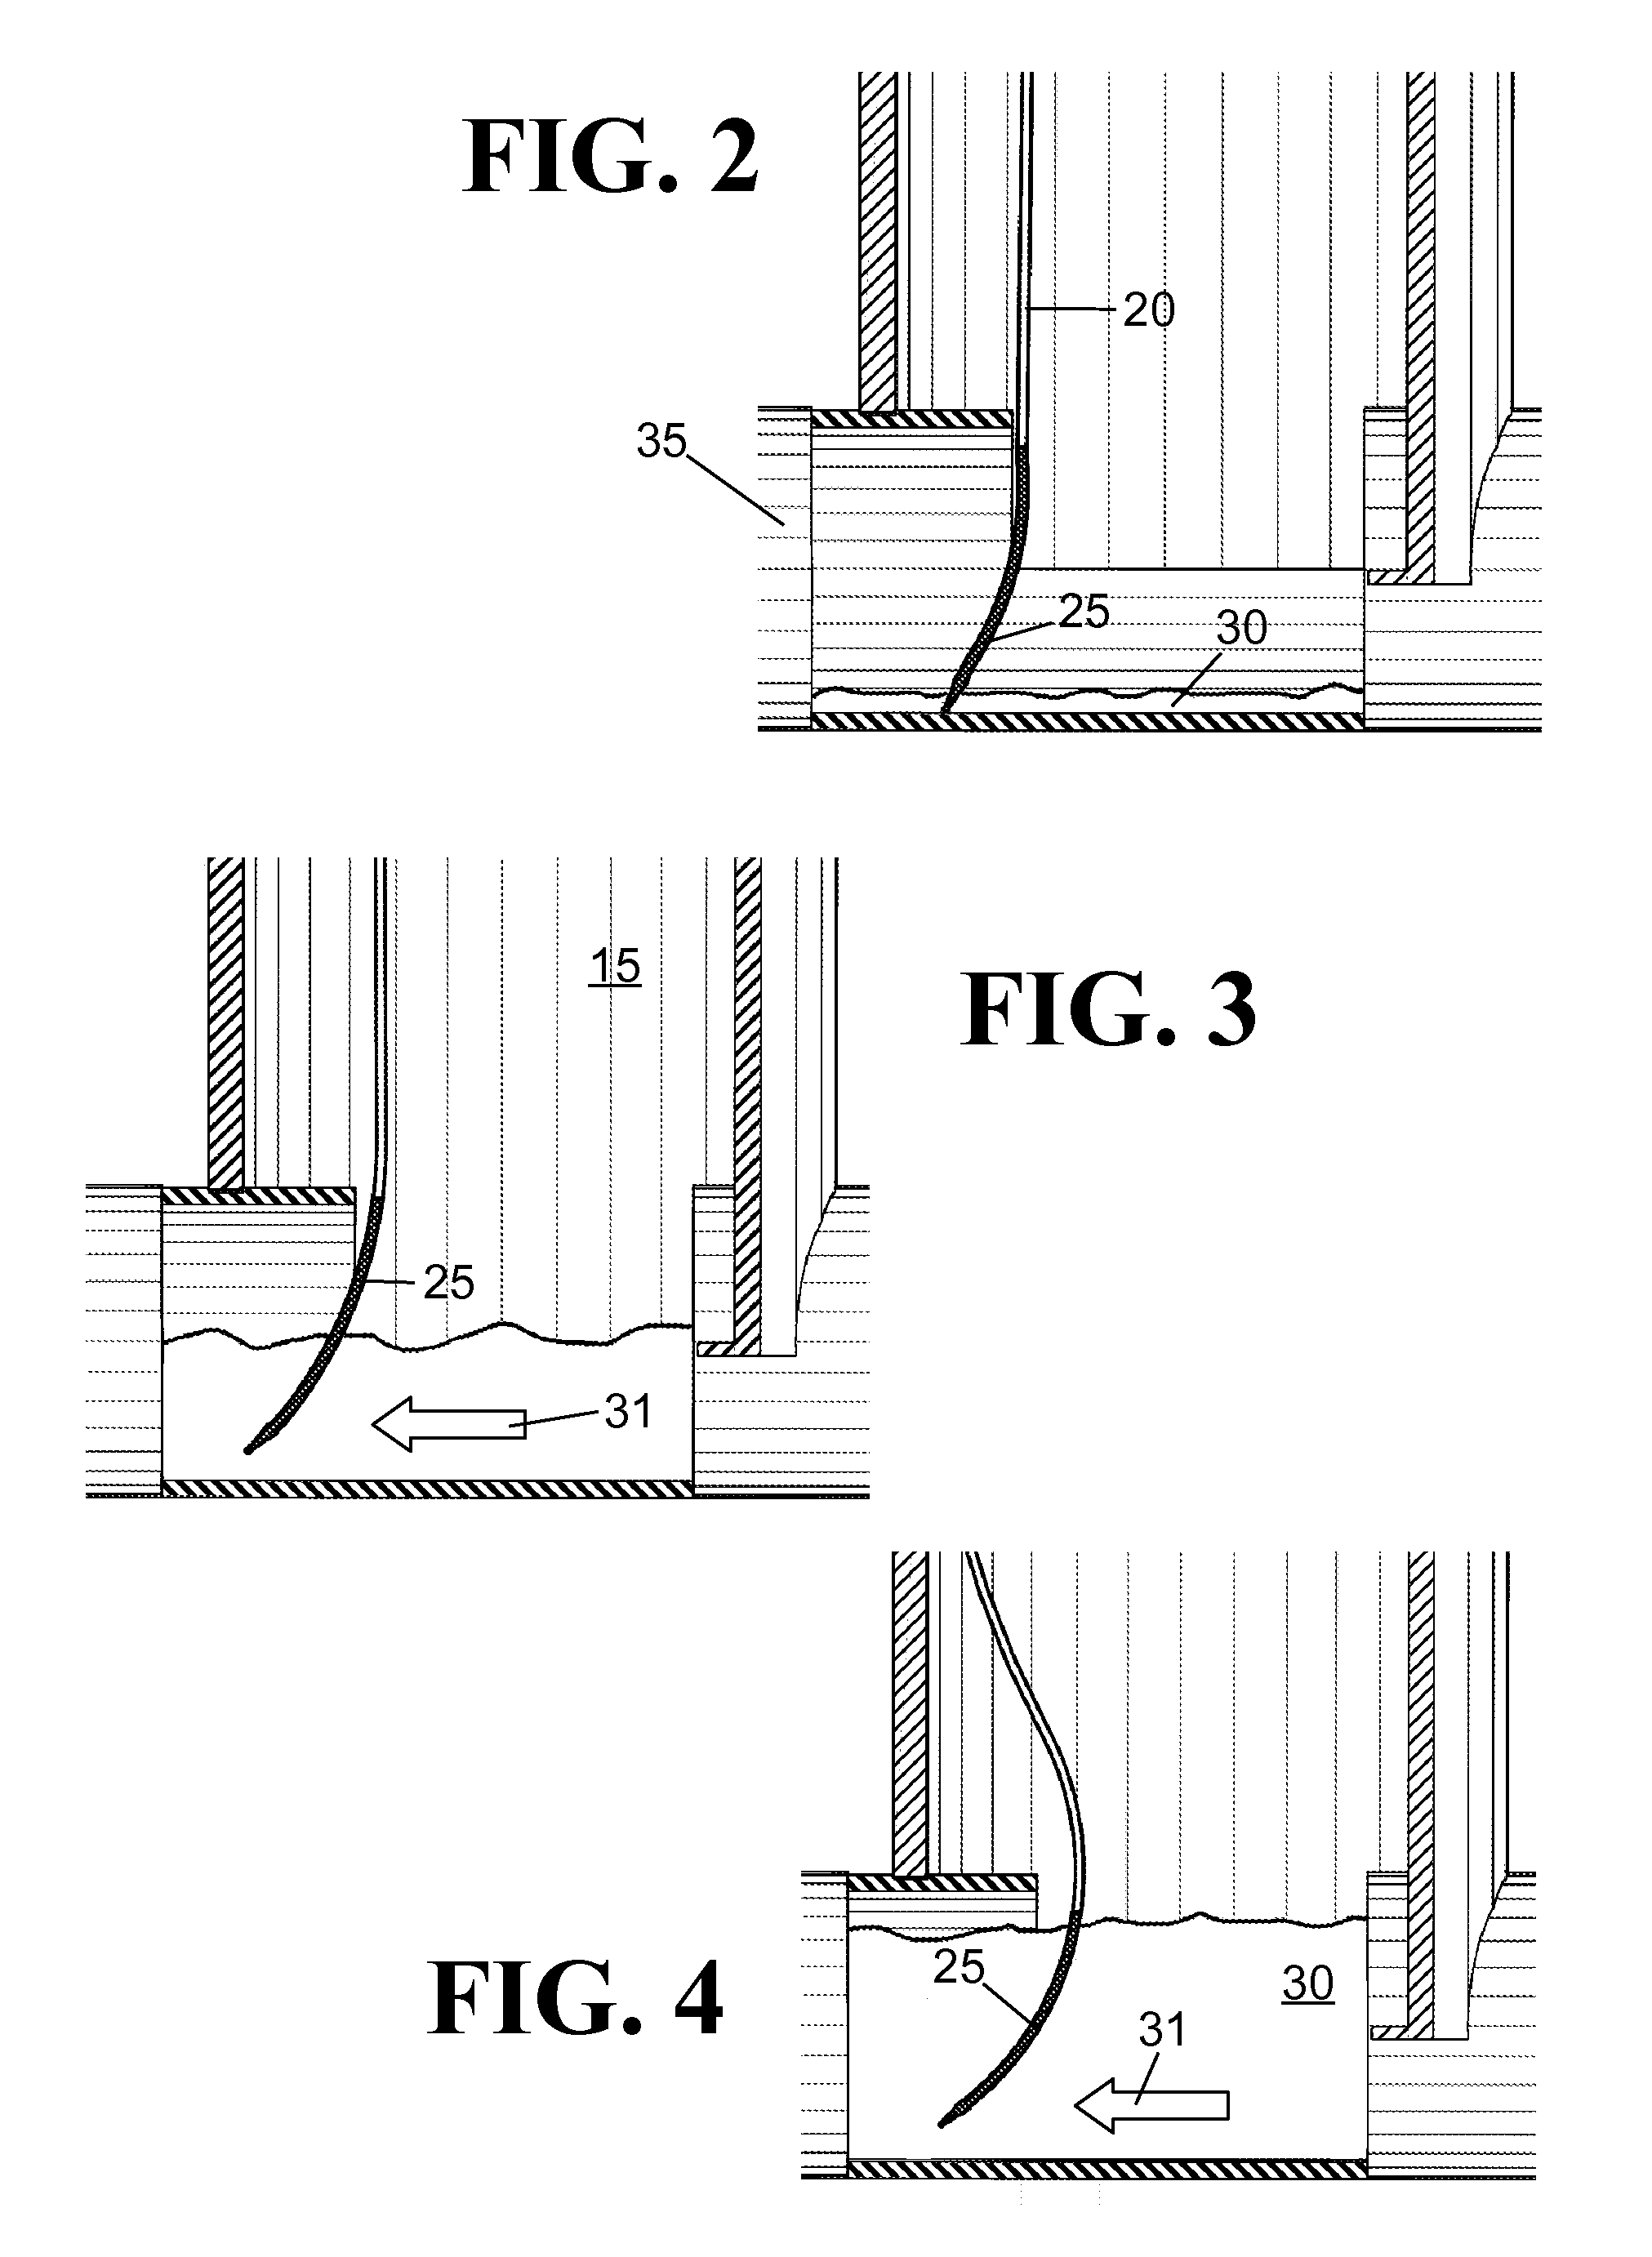 Method and Device for the Assessment of Fluid Collection Networks